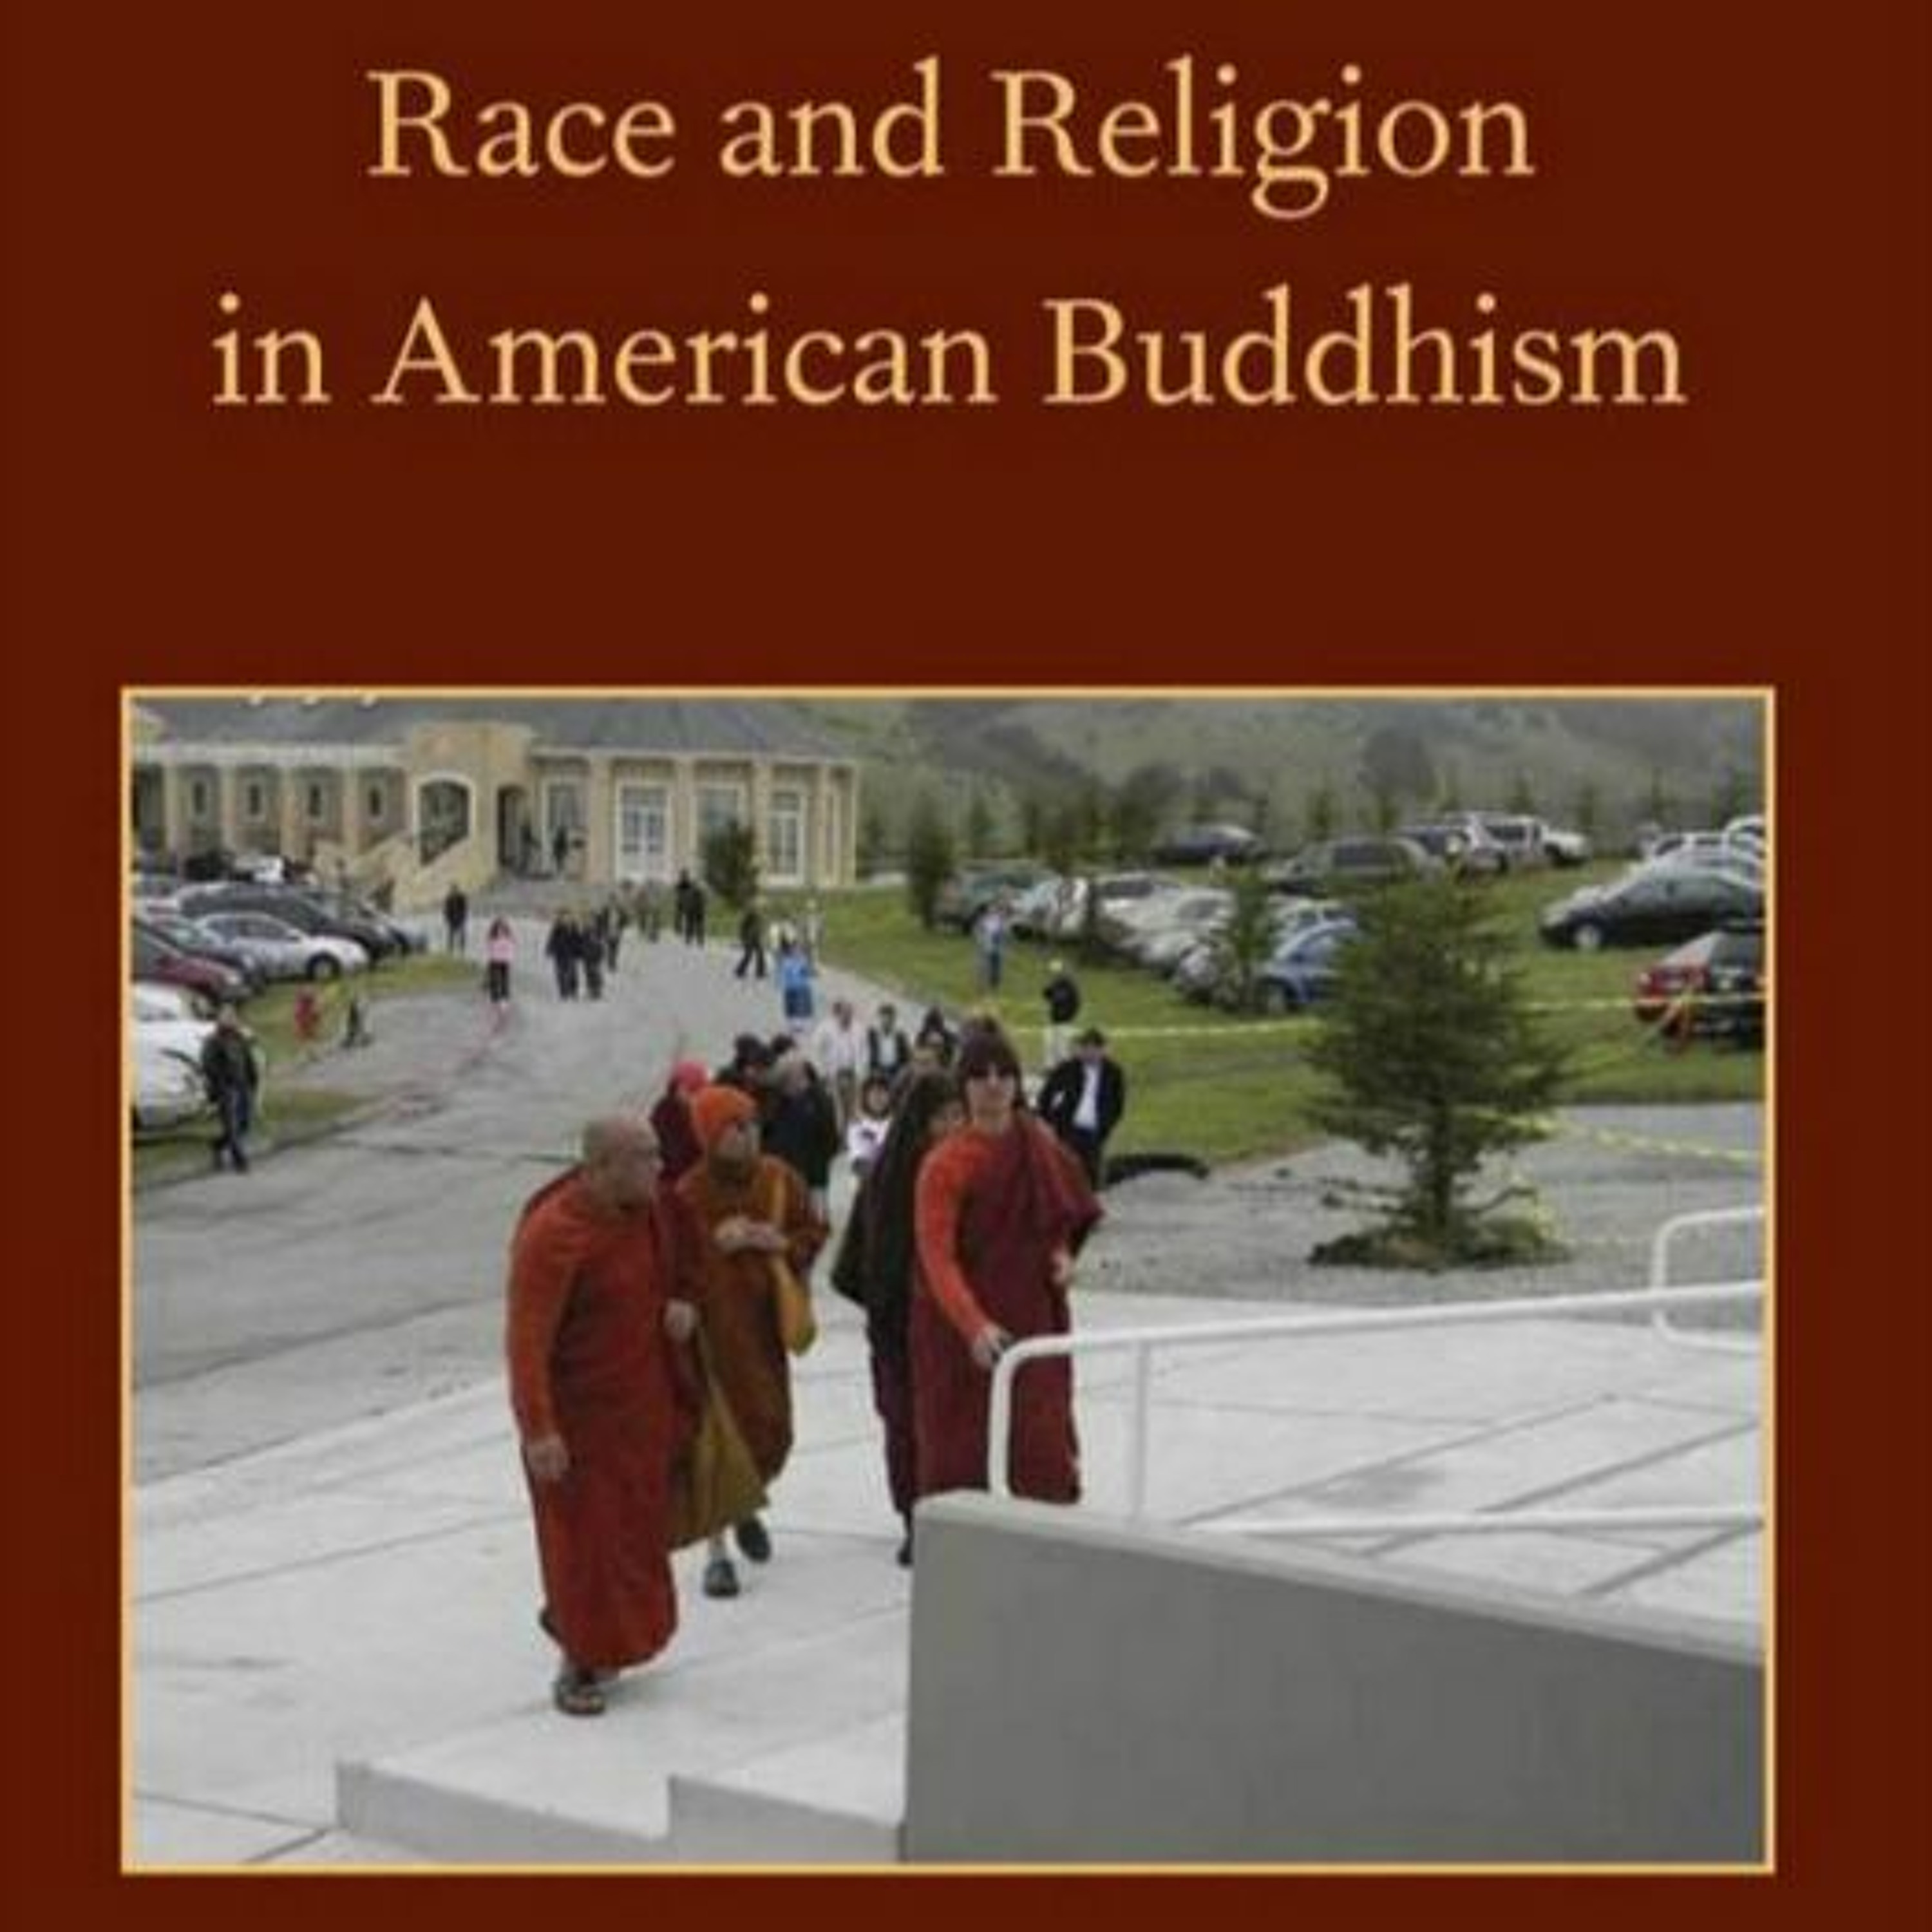 Footnotes for "Race and Religion in American Buddhism: White Supremacy and Immigrant Adaptation"